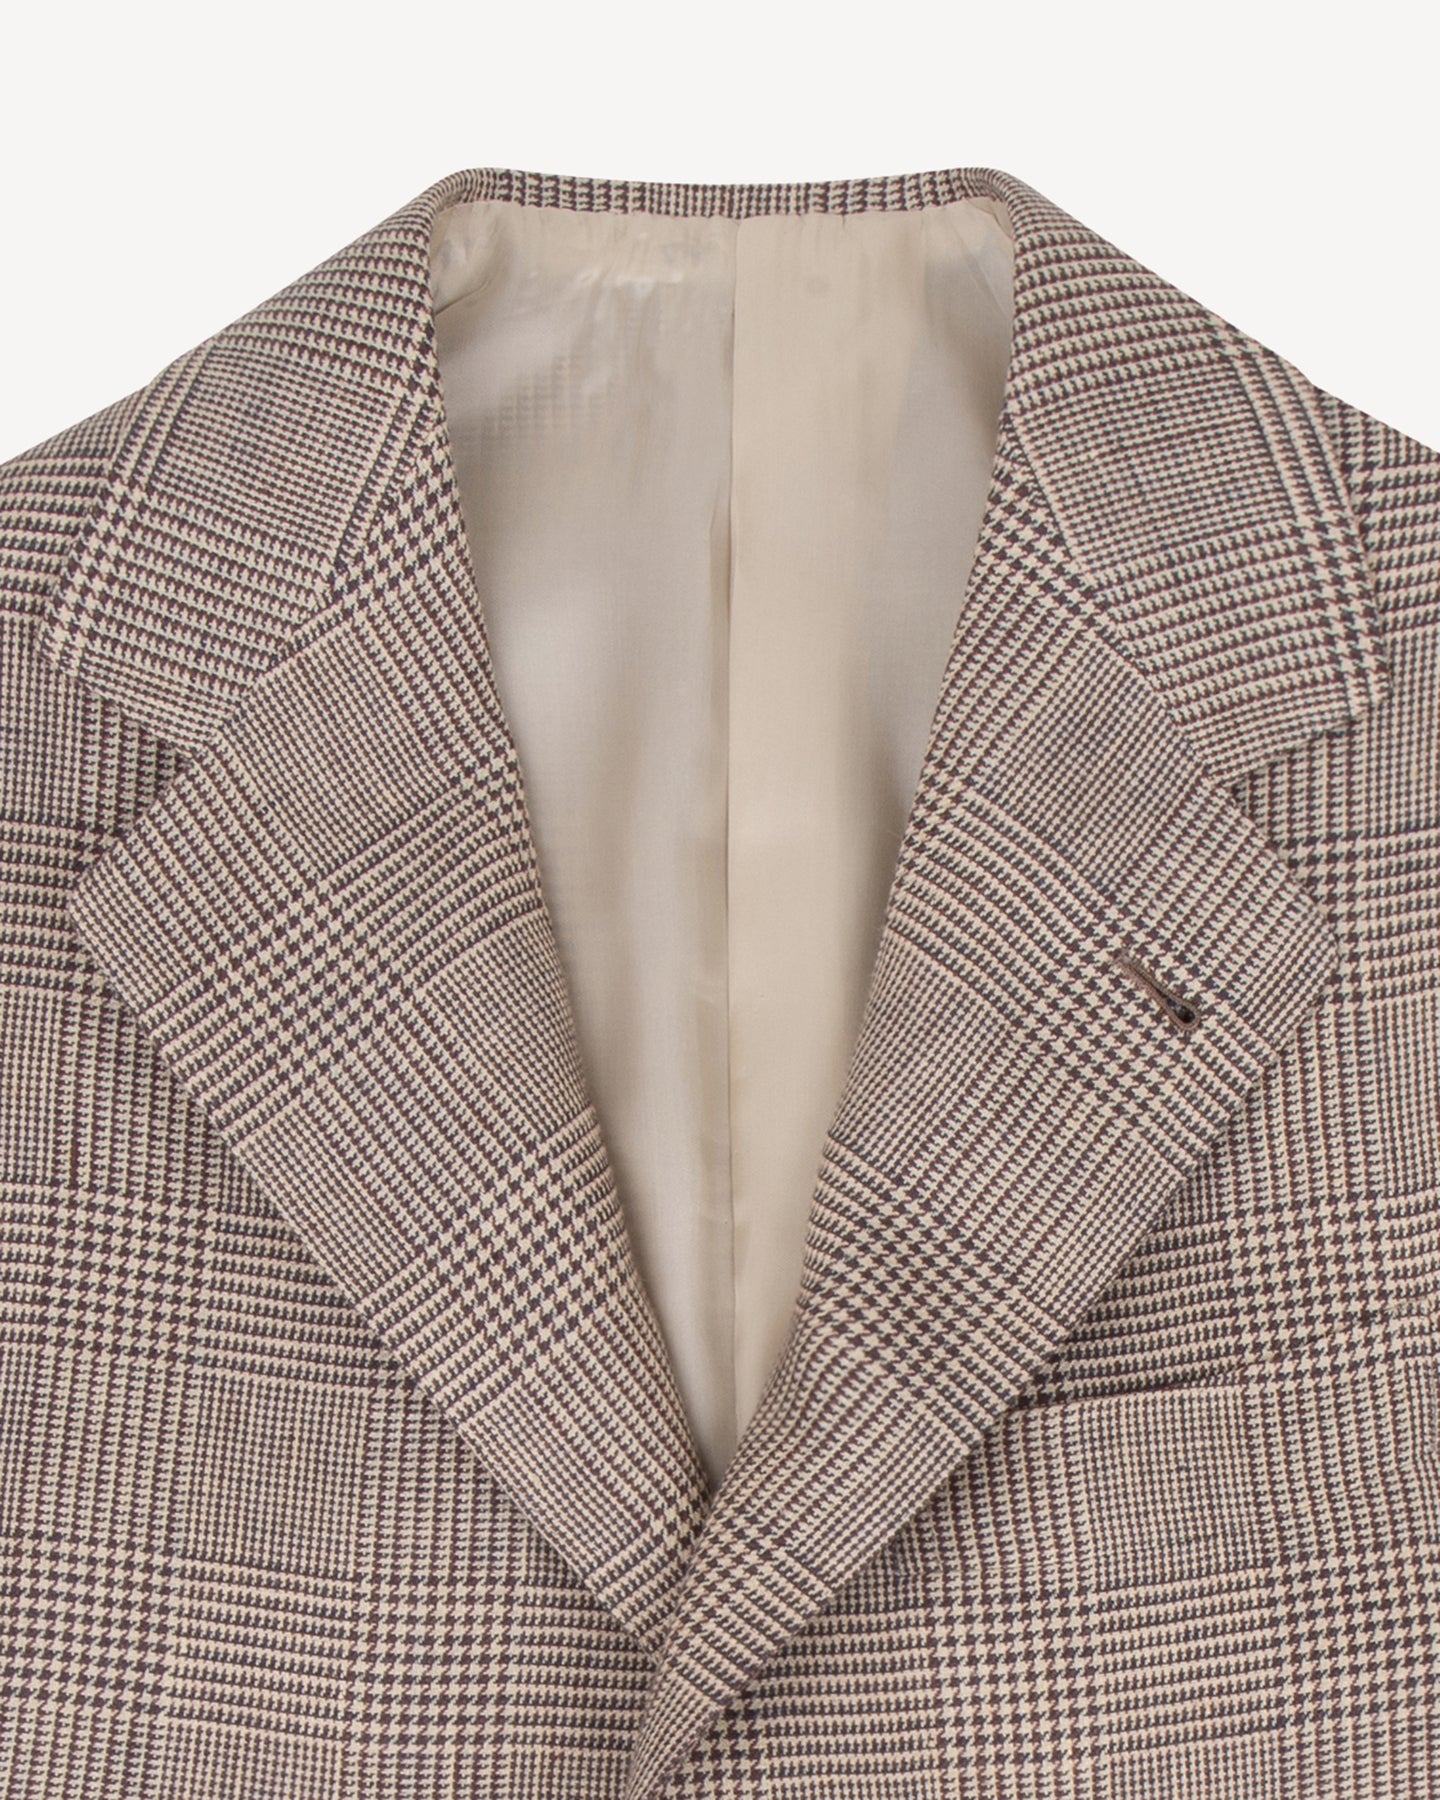 The lapel of a brown linen Prince of Wales sport coat